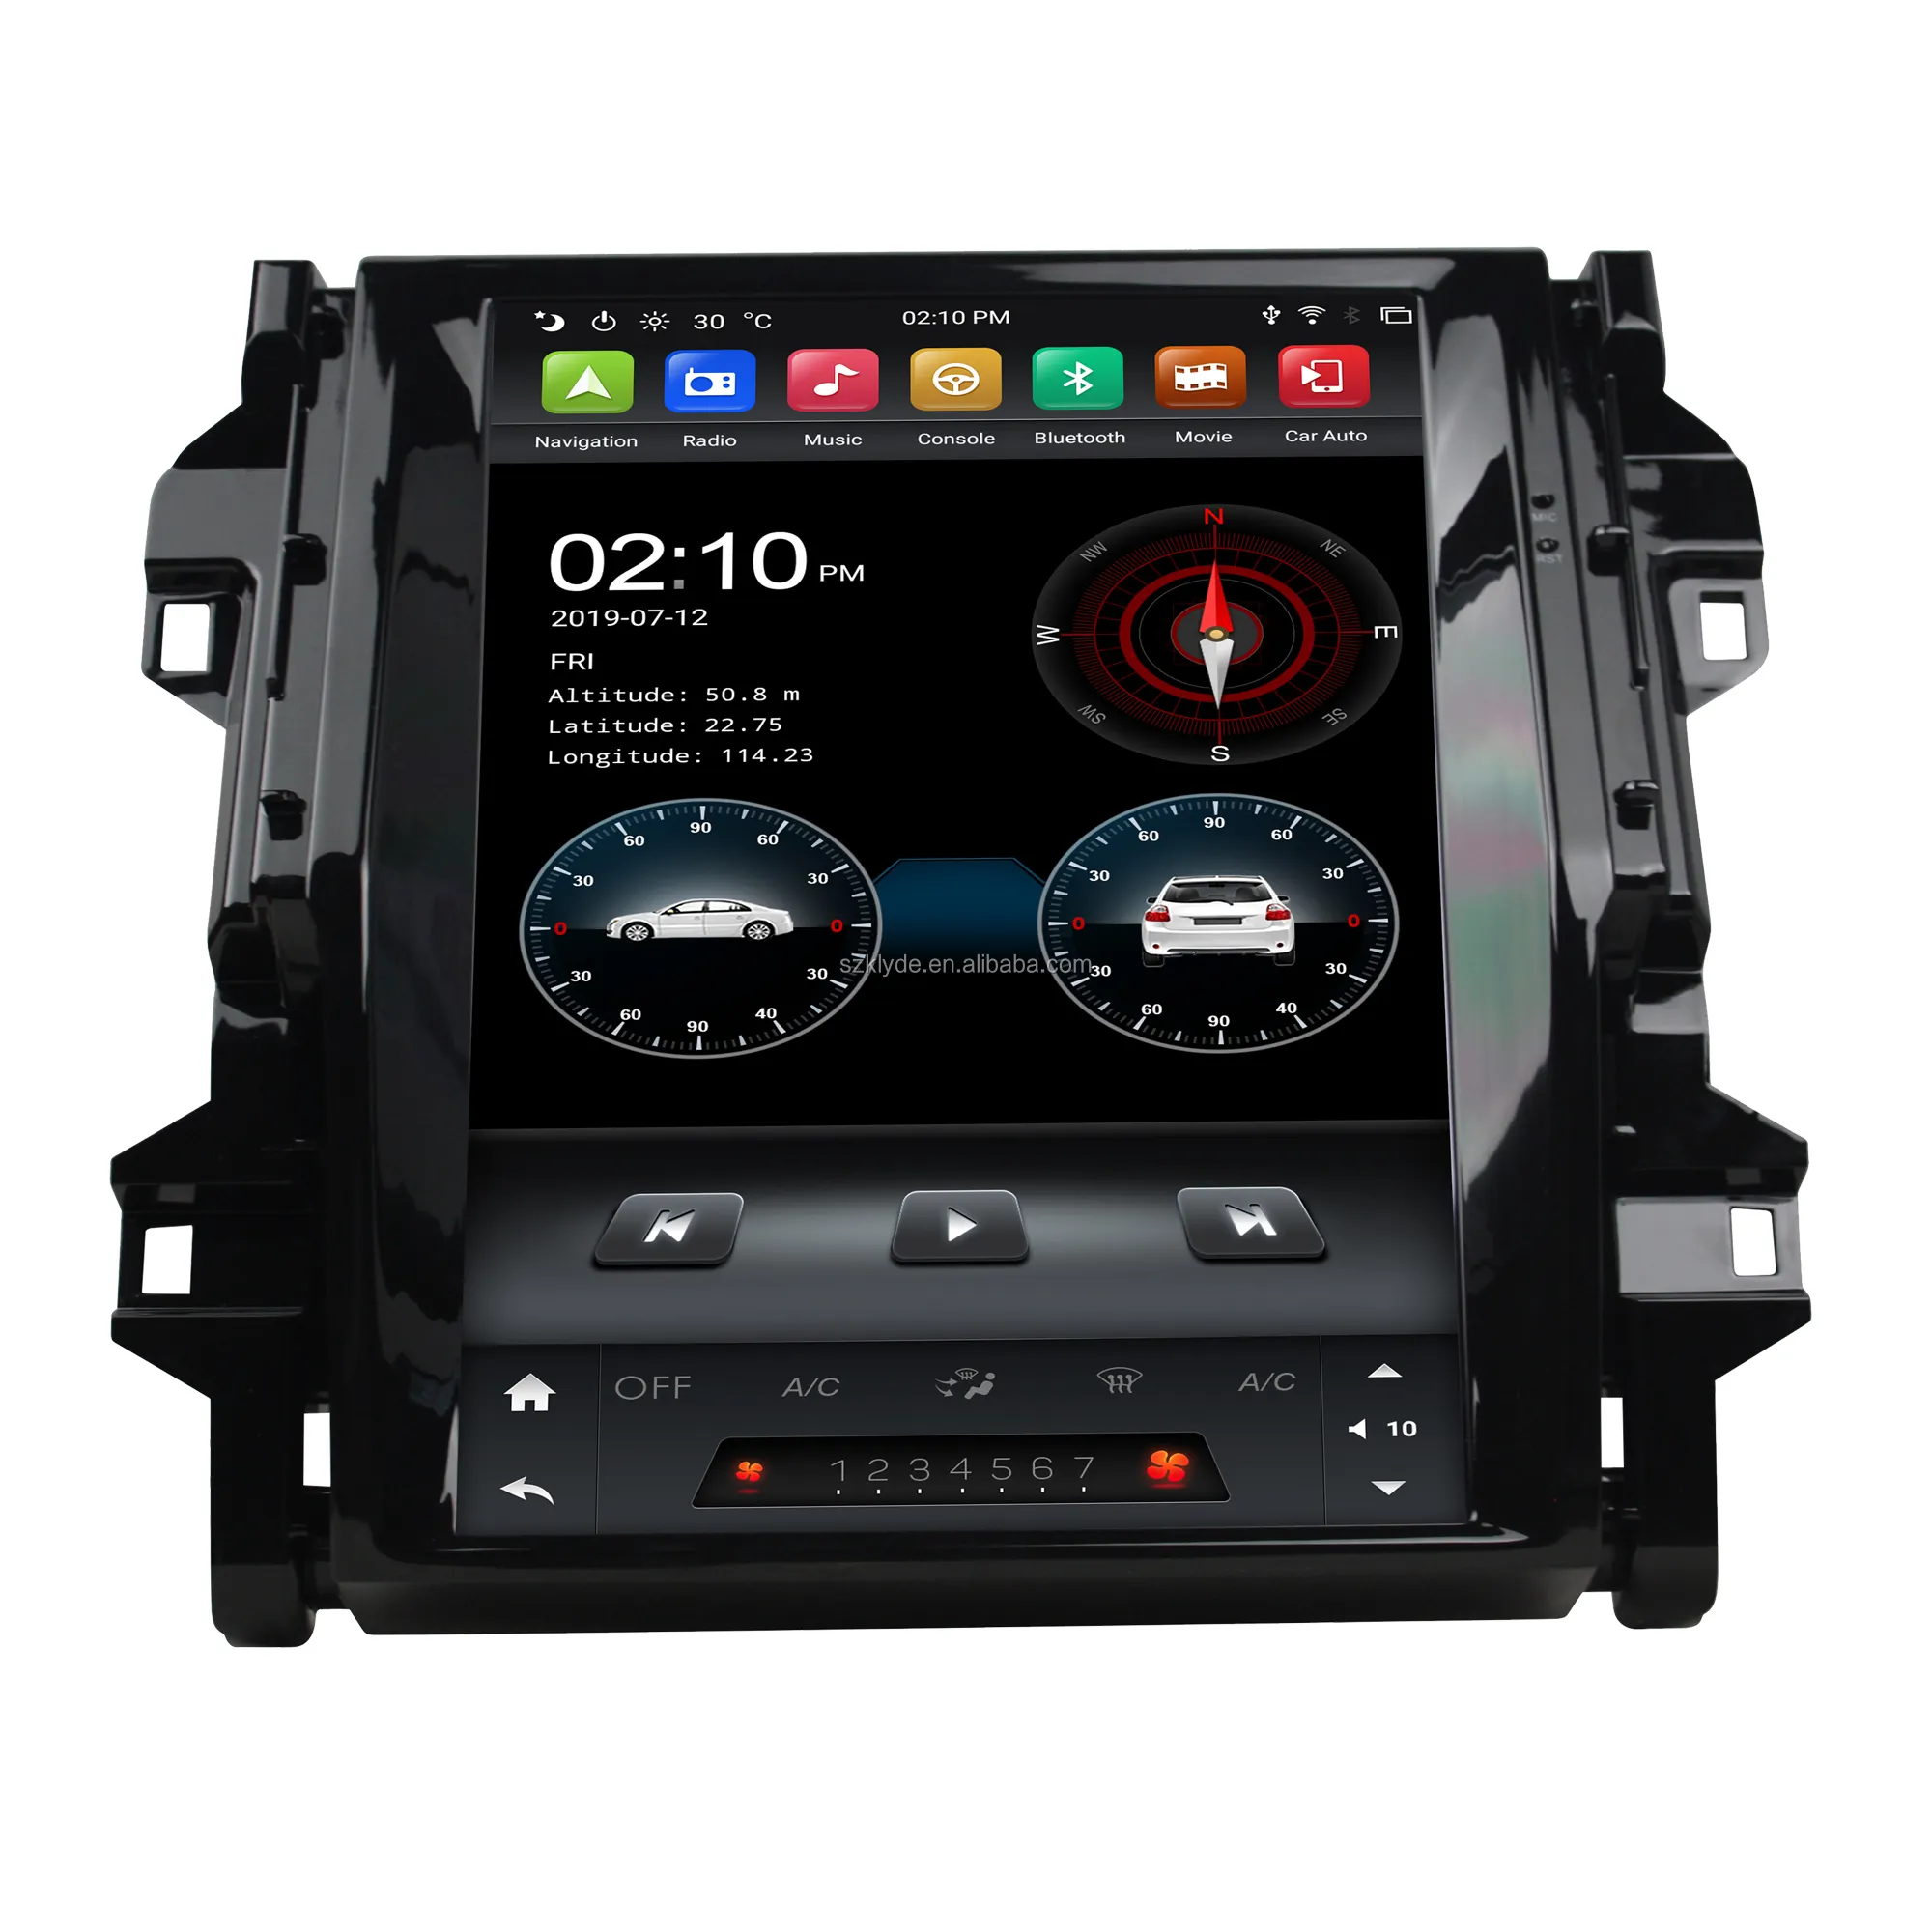 KLYDE 12.1" ips touch screen 4gb ram 32gb flash android tesla car radio gps player for Fortuner 2016-2019